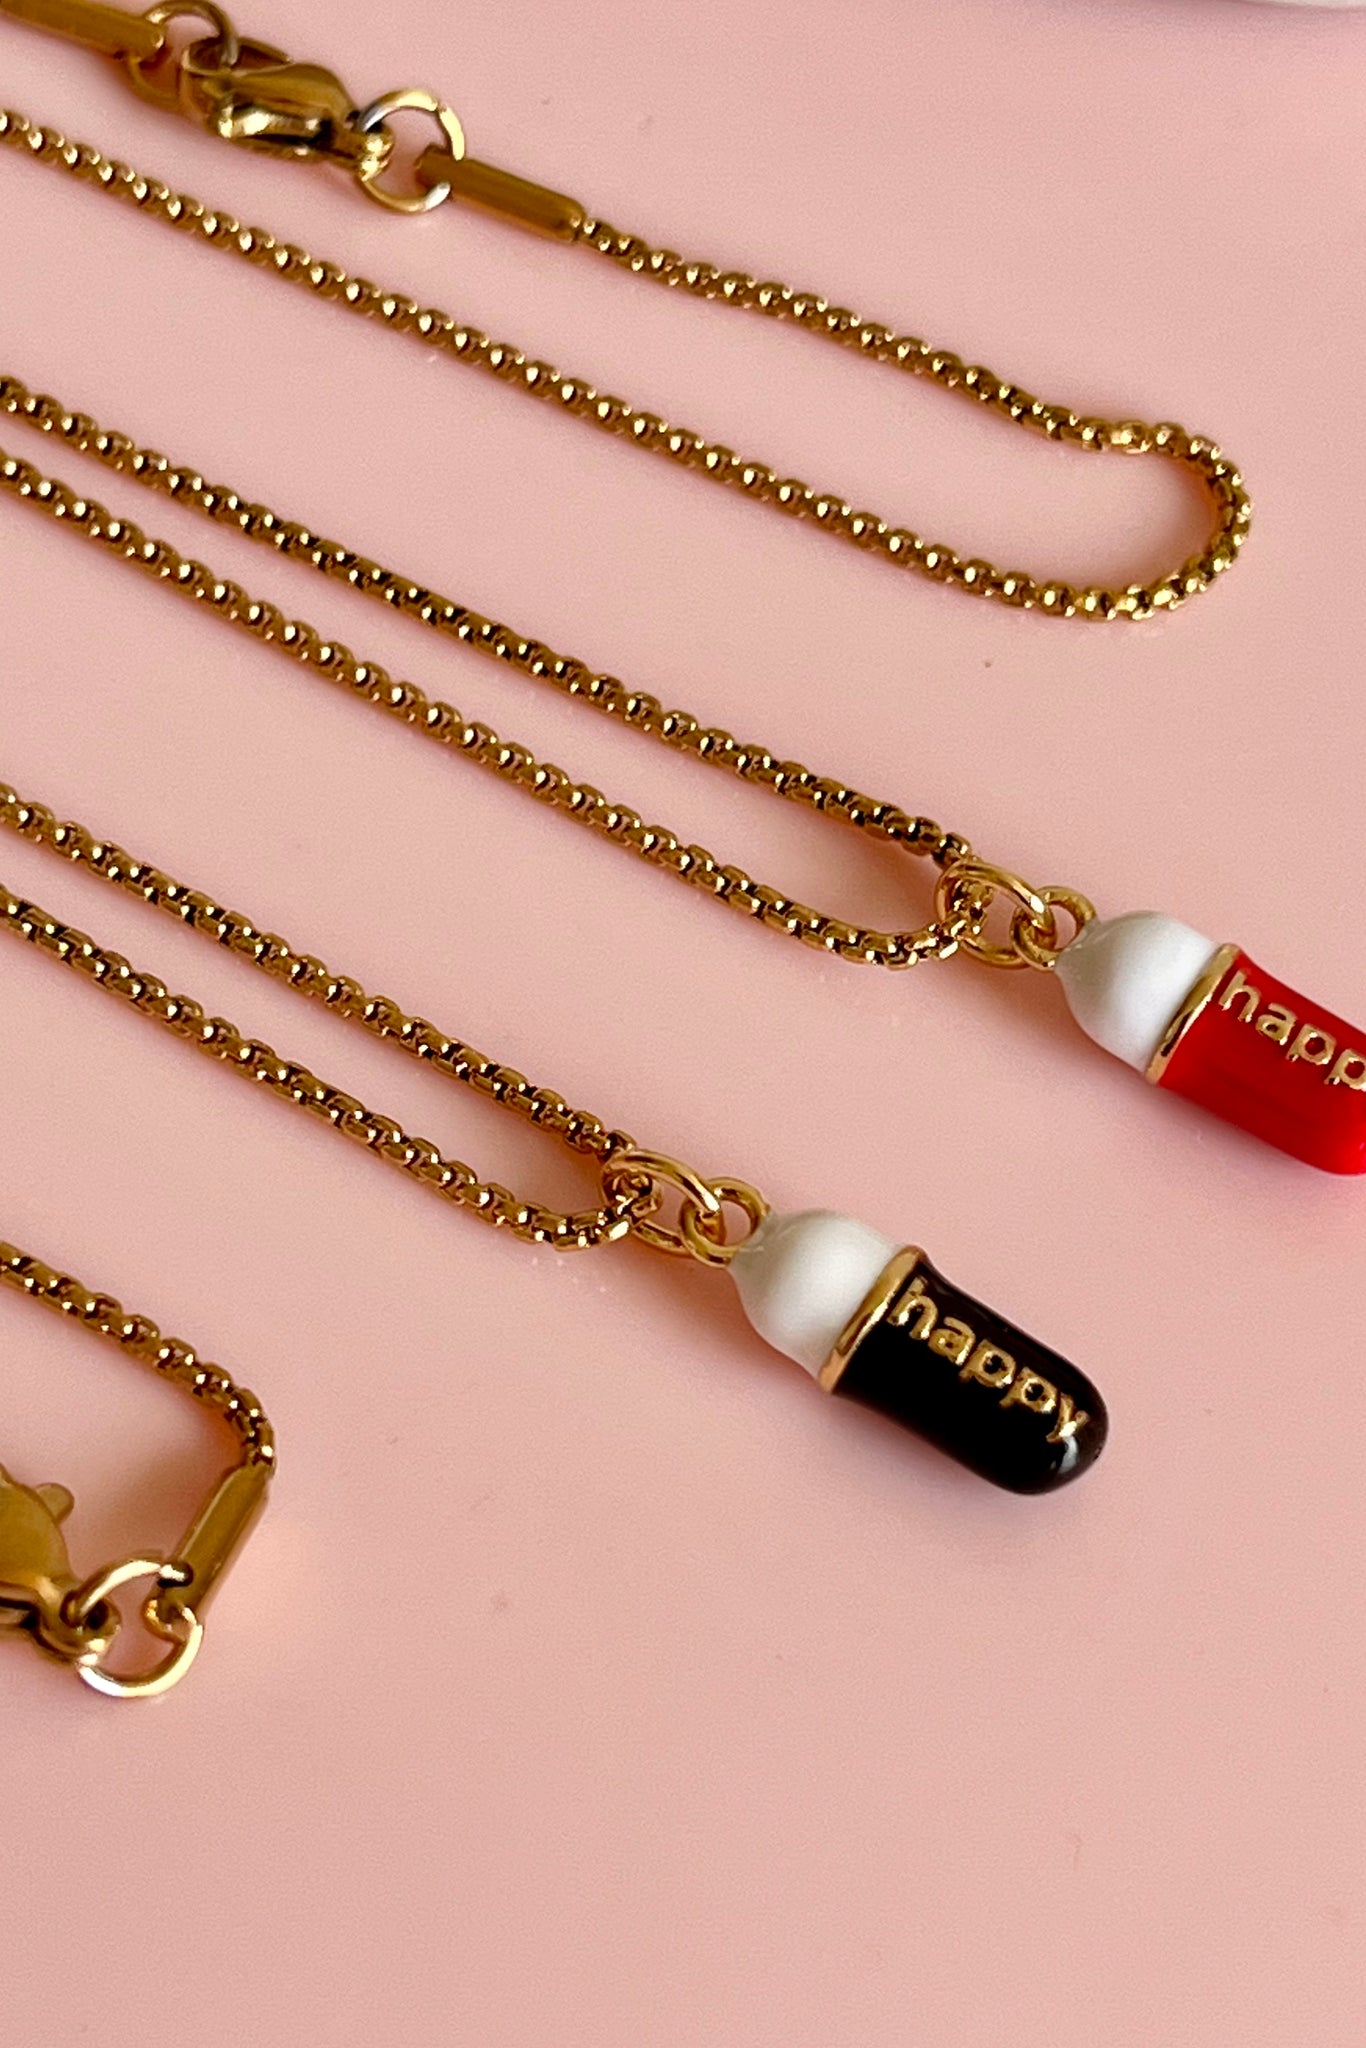 Penny Foggo - Happy Pill Necklace - Red or Black